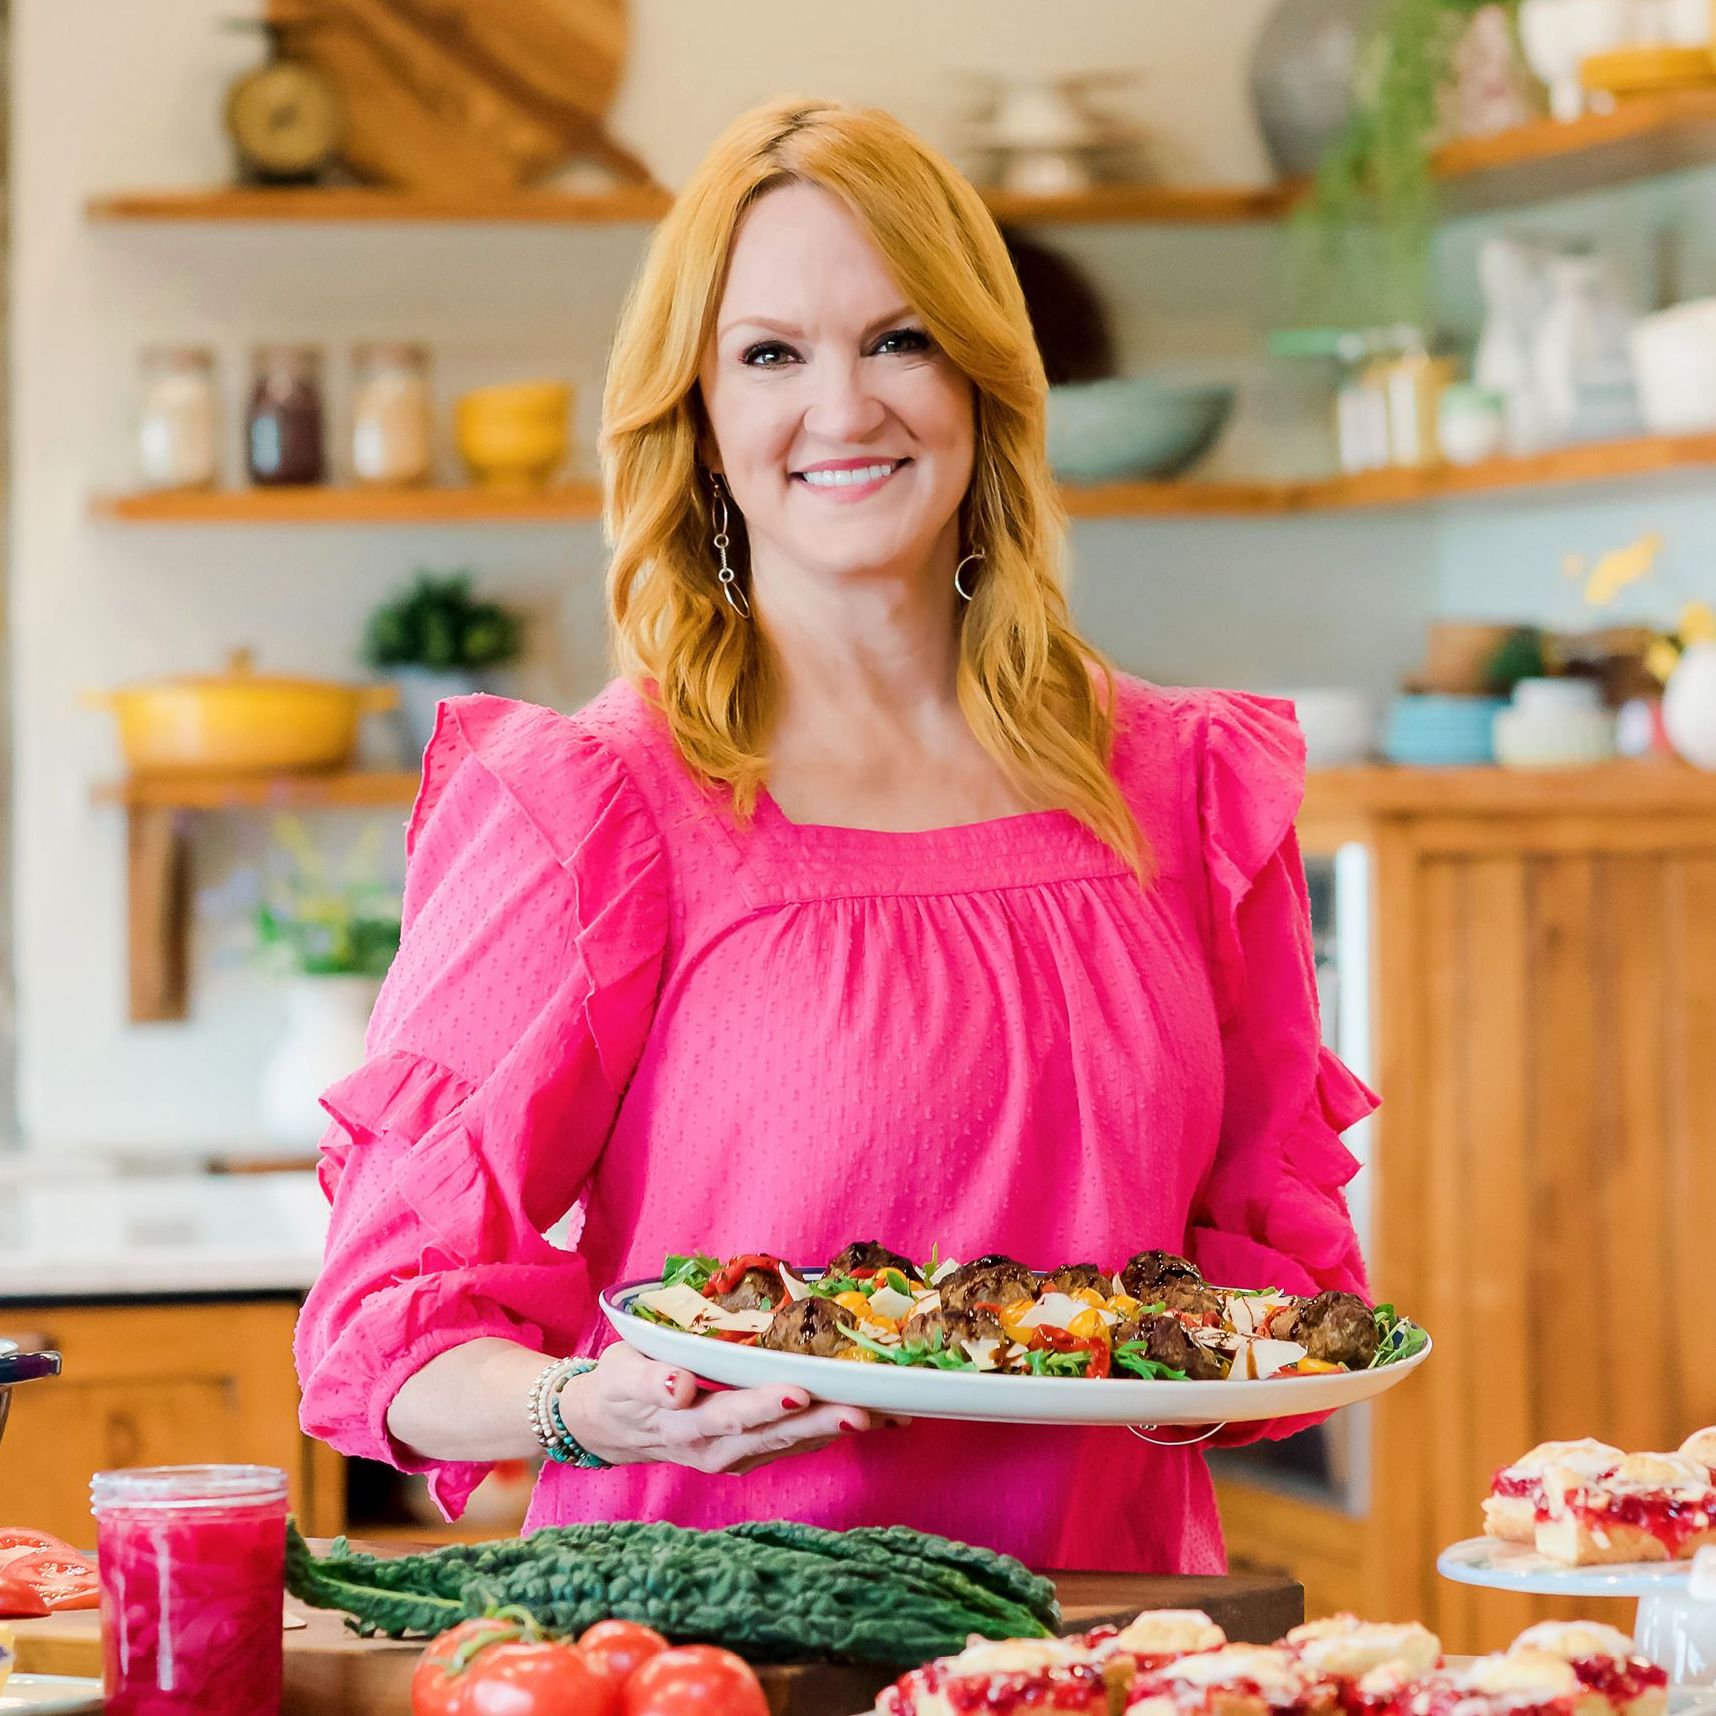 Ree Drummond's Blouse from Her New Cookbook Cover Is on Sale